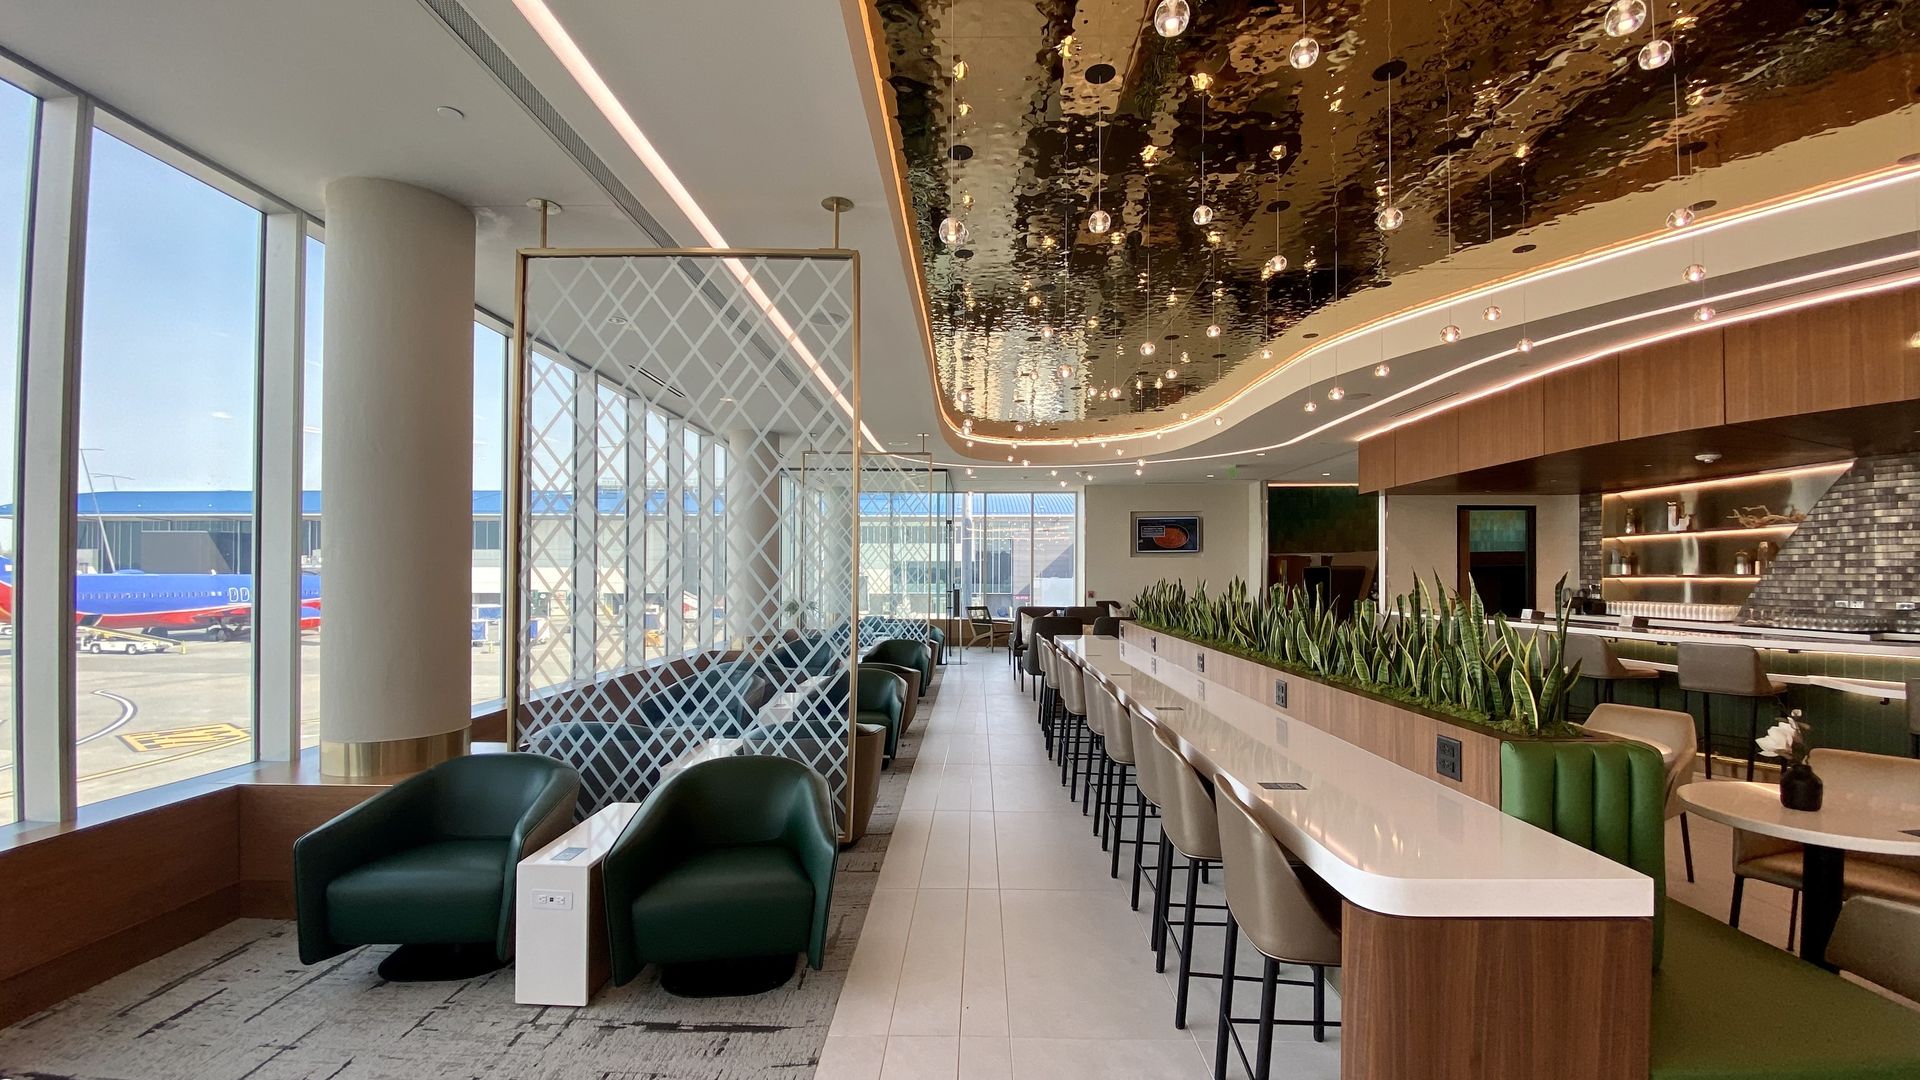 The Club CLT in concourse A is the airport's newest lounge. It opened in spring 2022. Photo: Ashley Mahoney/Axios